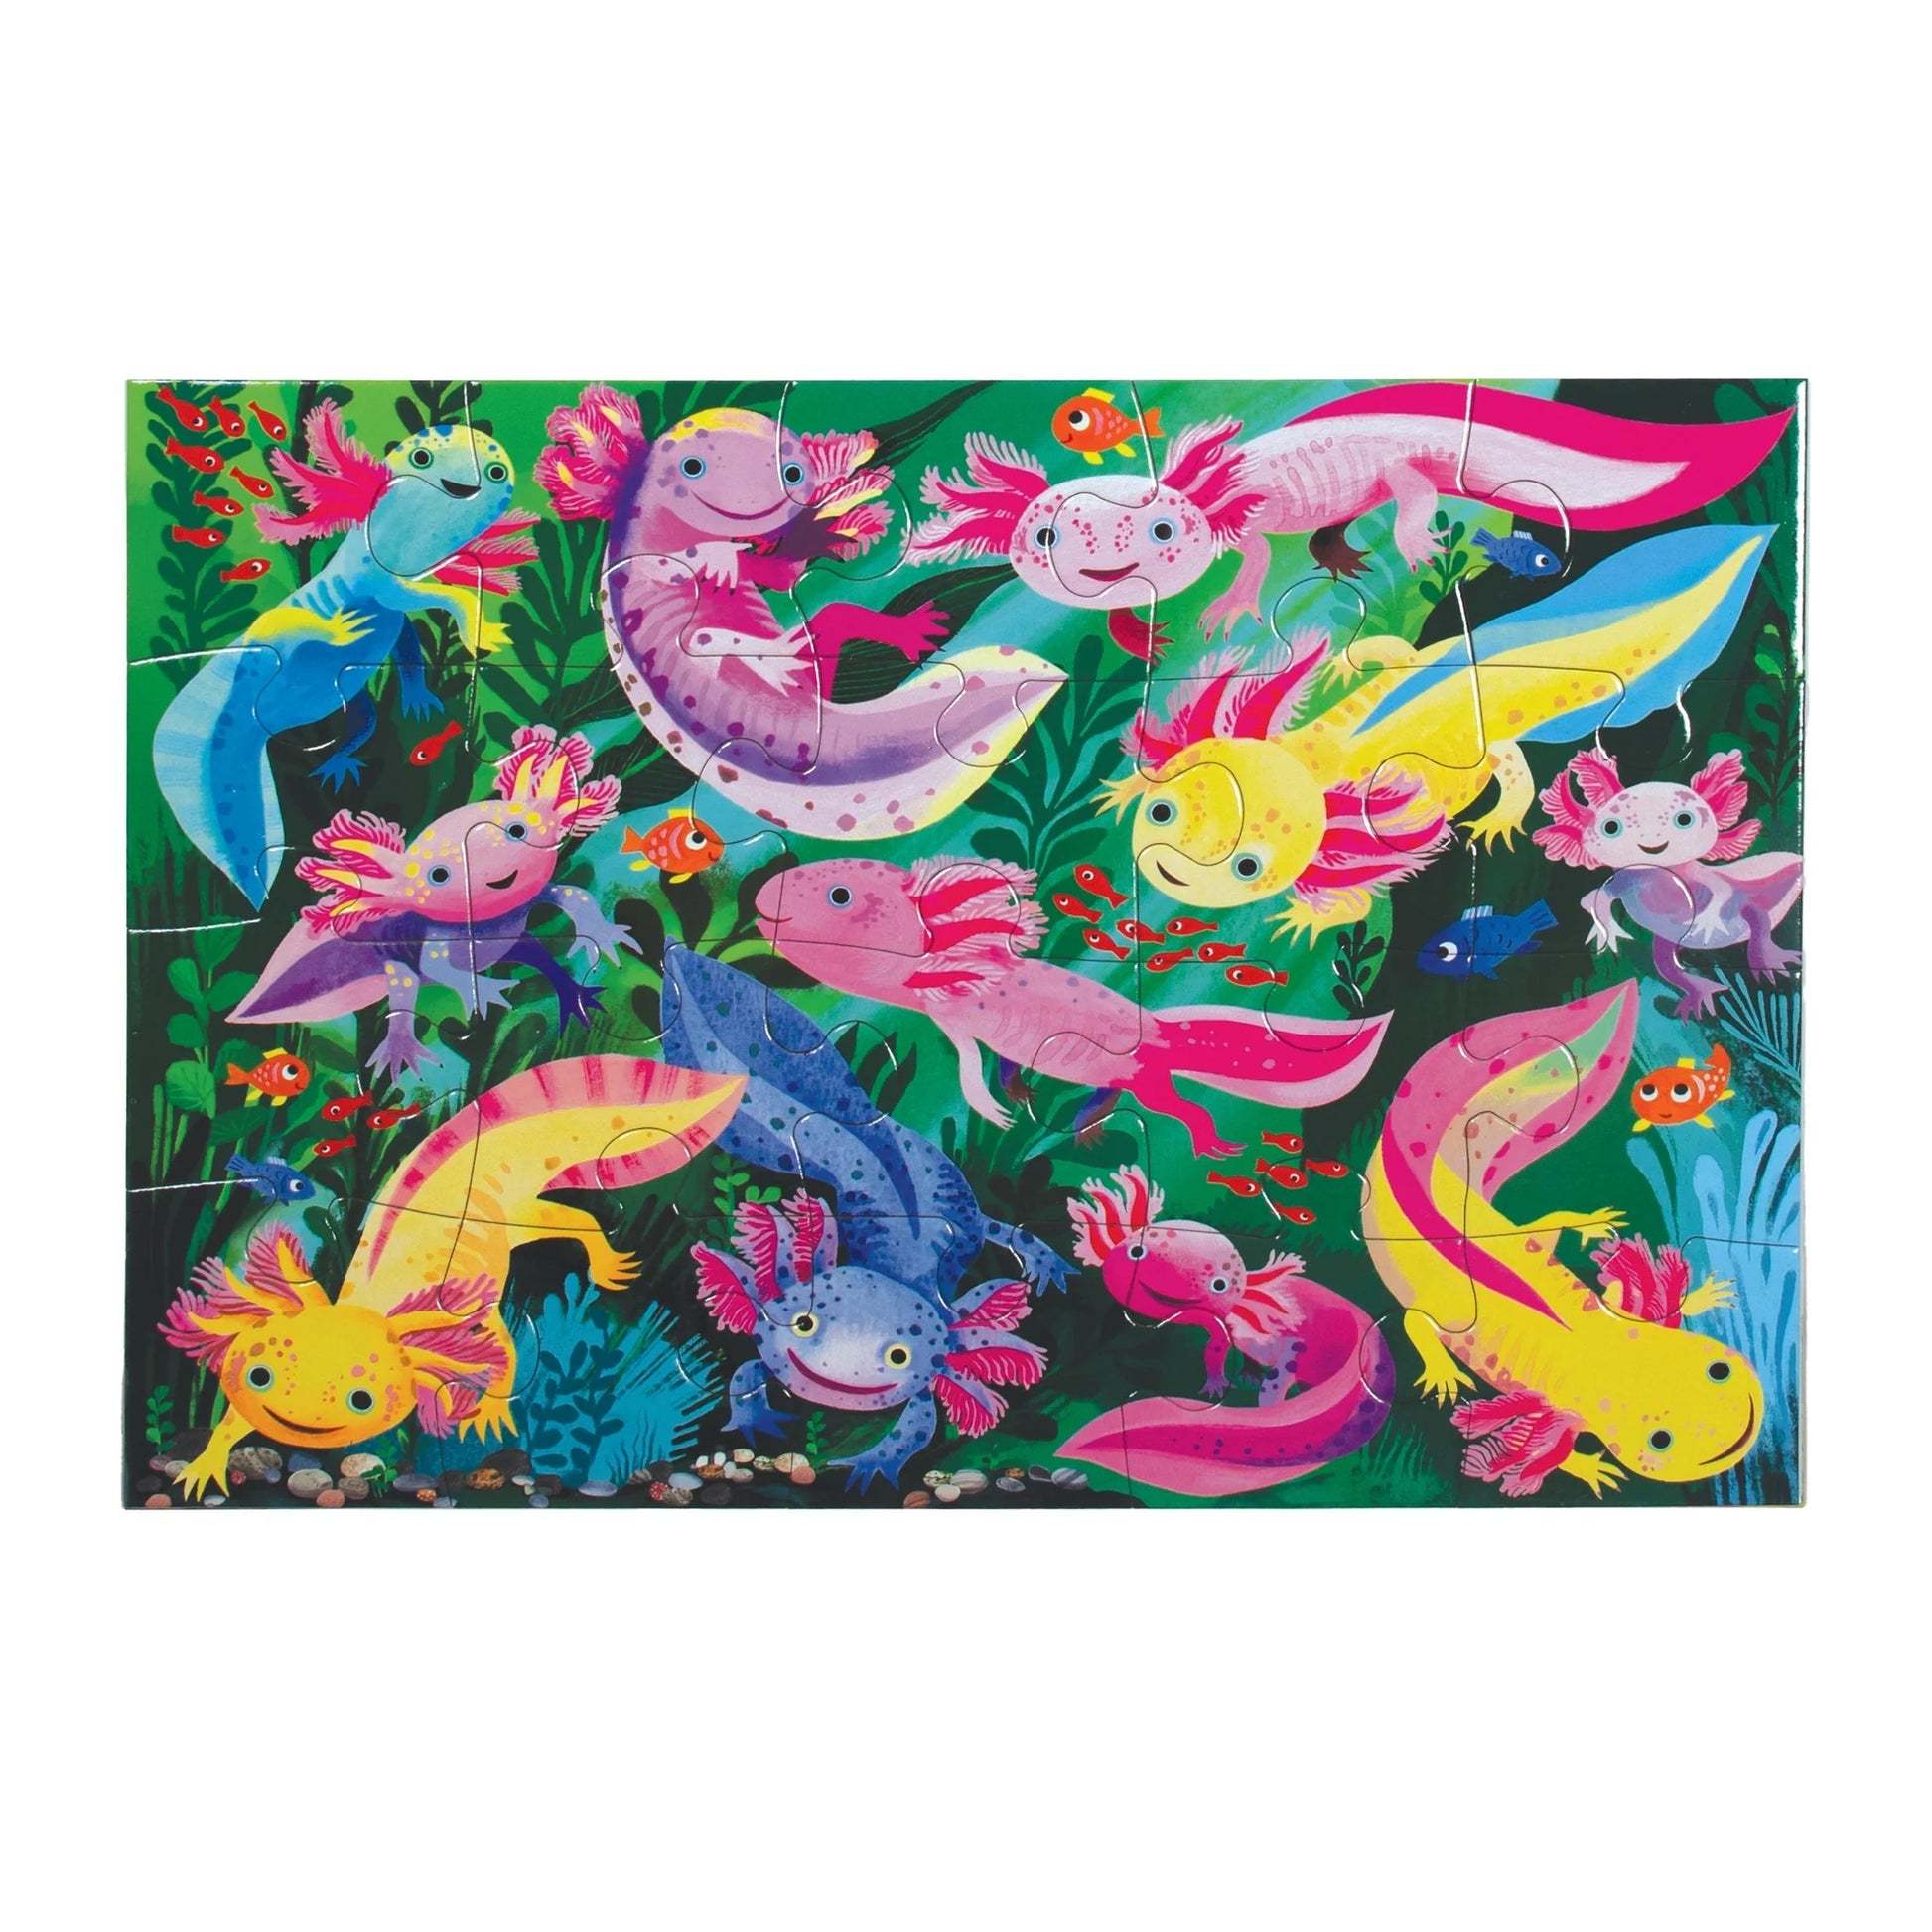 completed Axolotl 20-Piece Puzzle